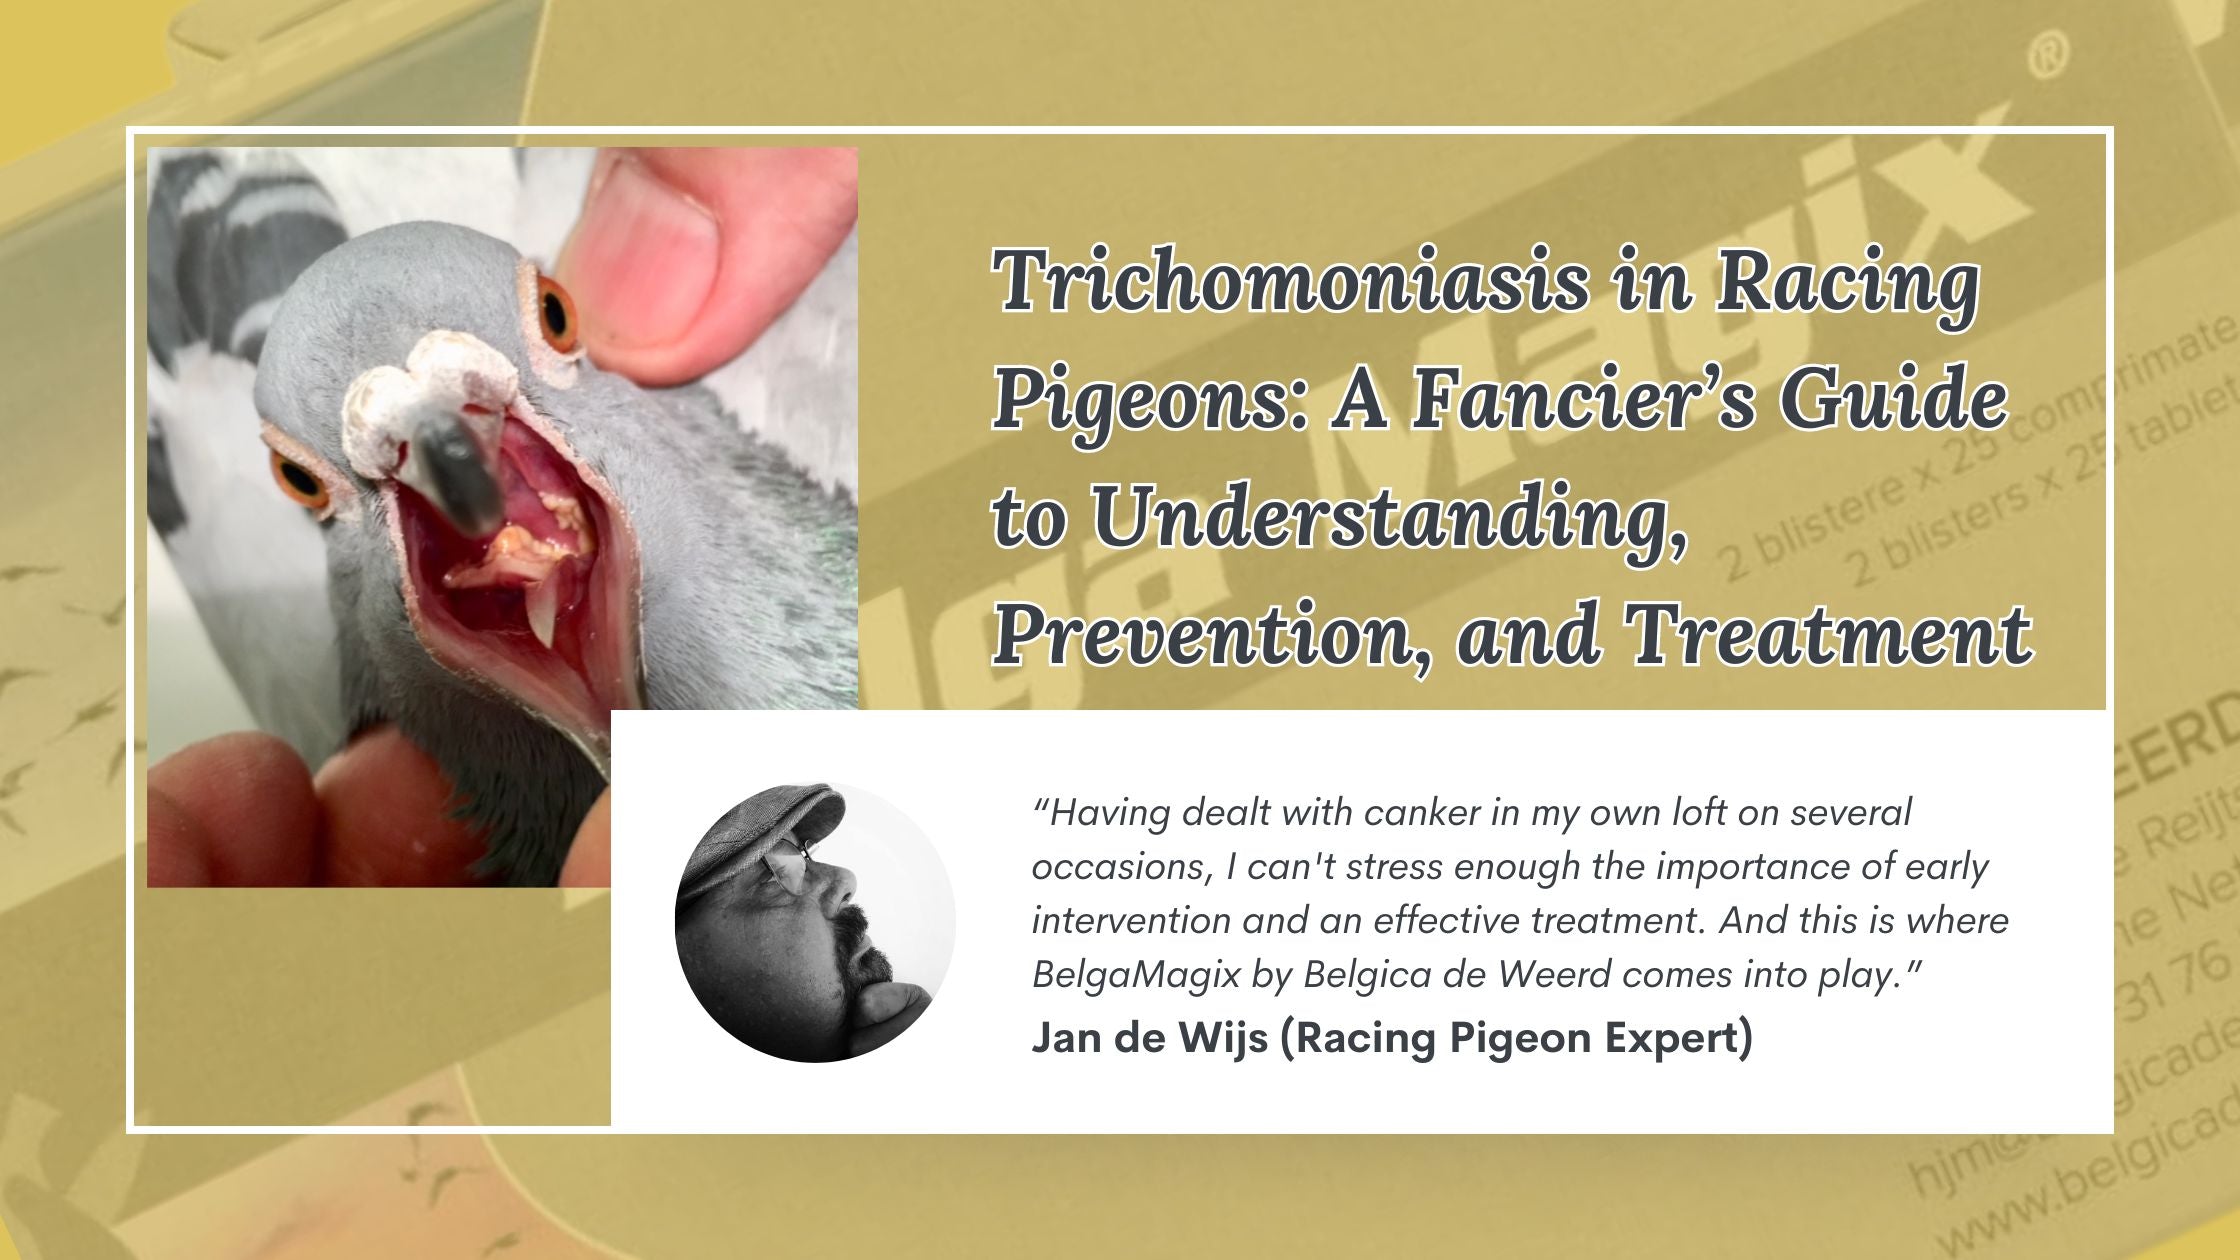 Trichomoniasis in Racing Pigeons: A Fancier’s Guide to Understanding, Prevention, and Treatment